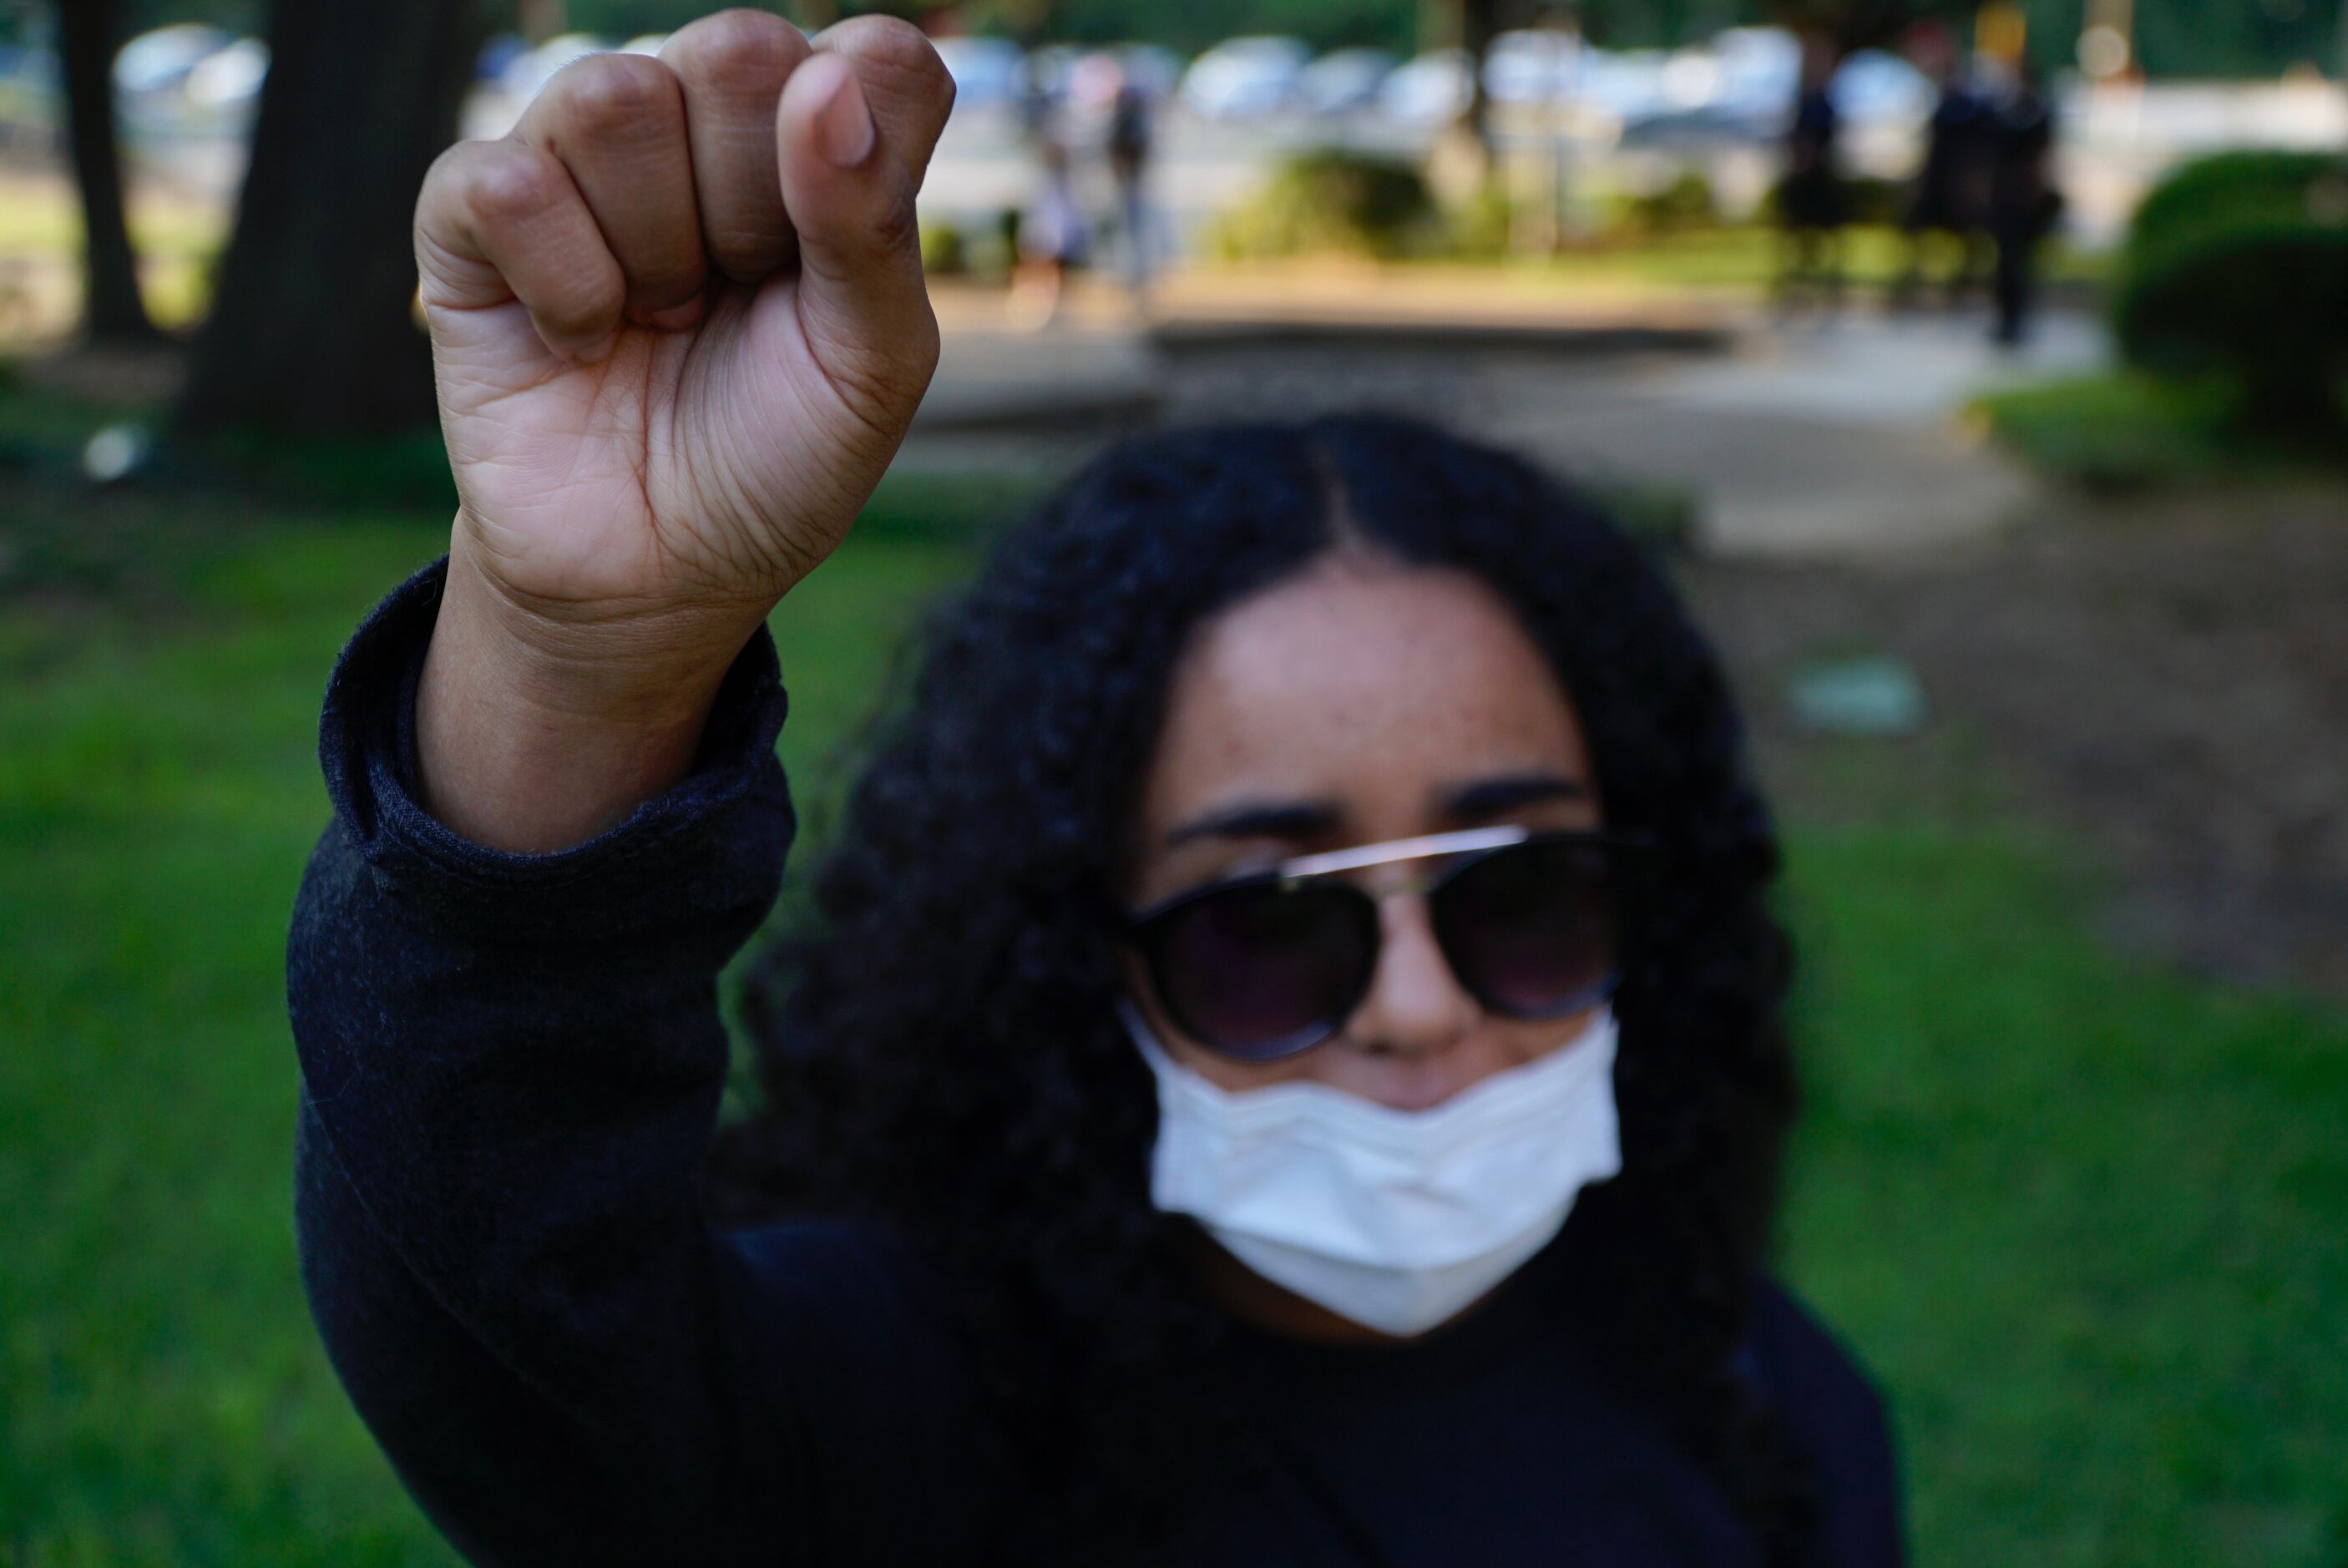 Sarah Mohammed (17) was among hundreds of people who marched in a protest in Irving, Texas...